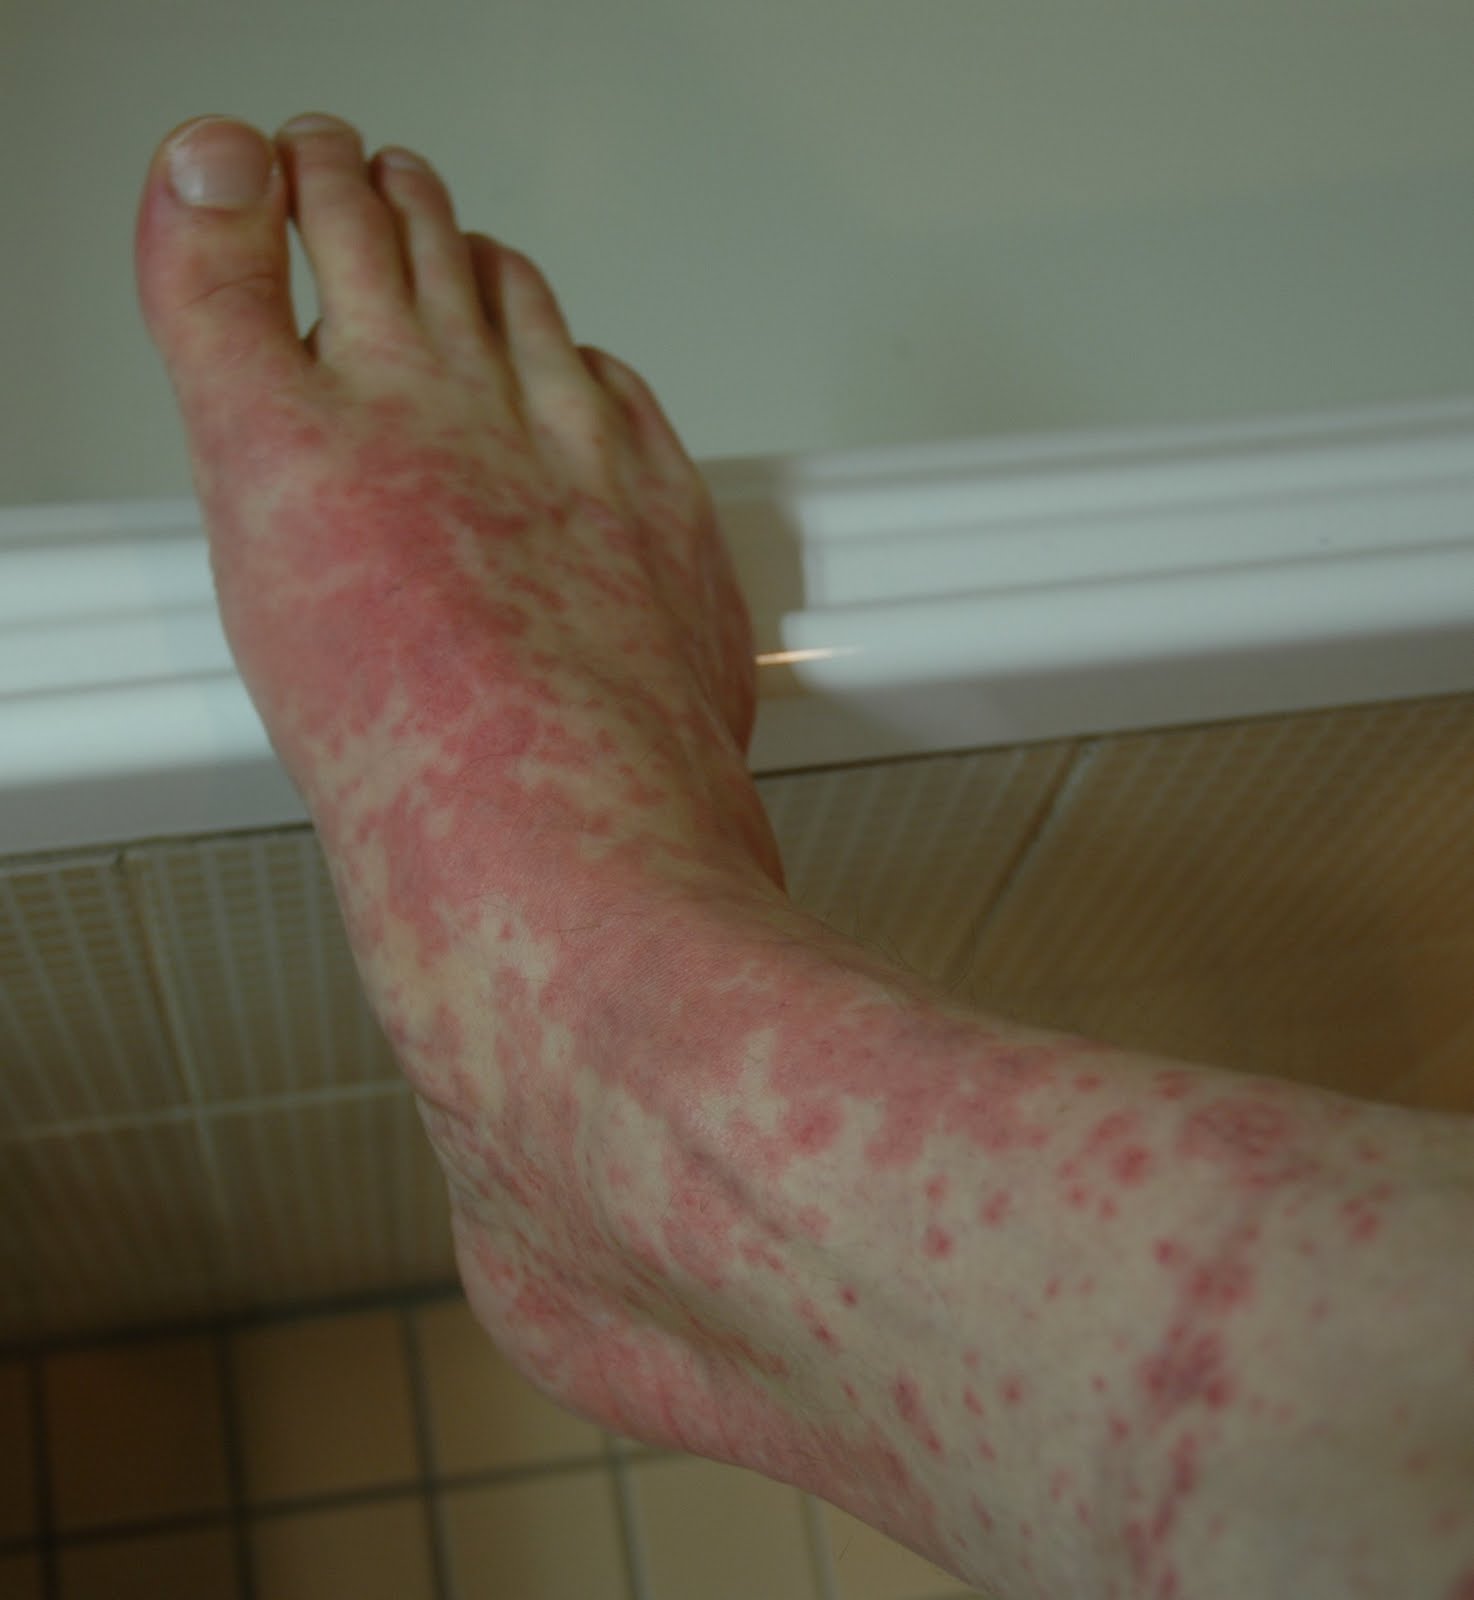 Skin Rashes On Legs And Feet - Doctor answers on HealthTap